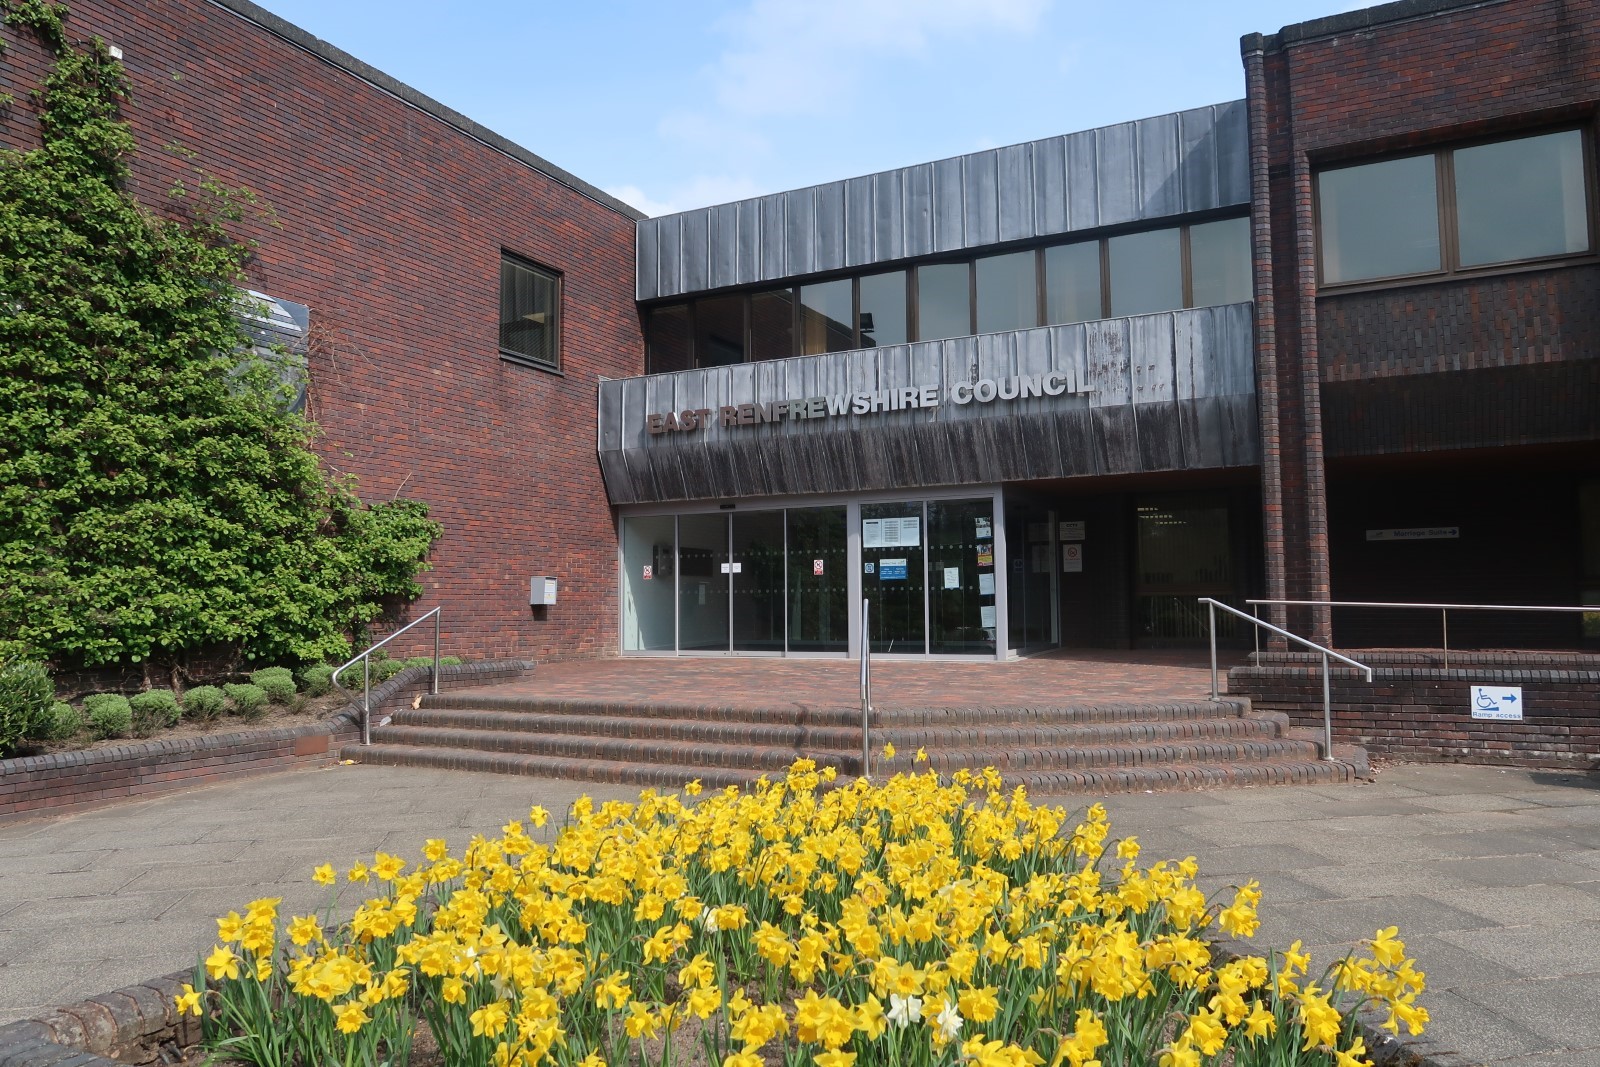 East Renfrewshire Council building with yellow flowers in front of it